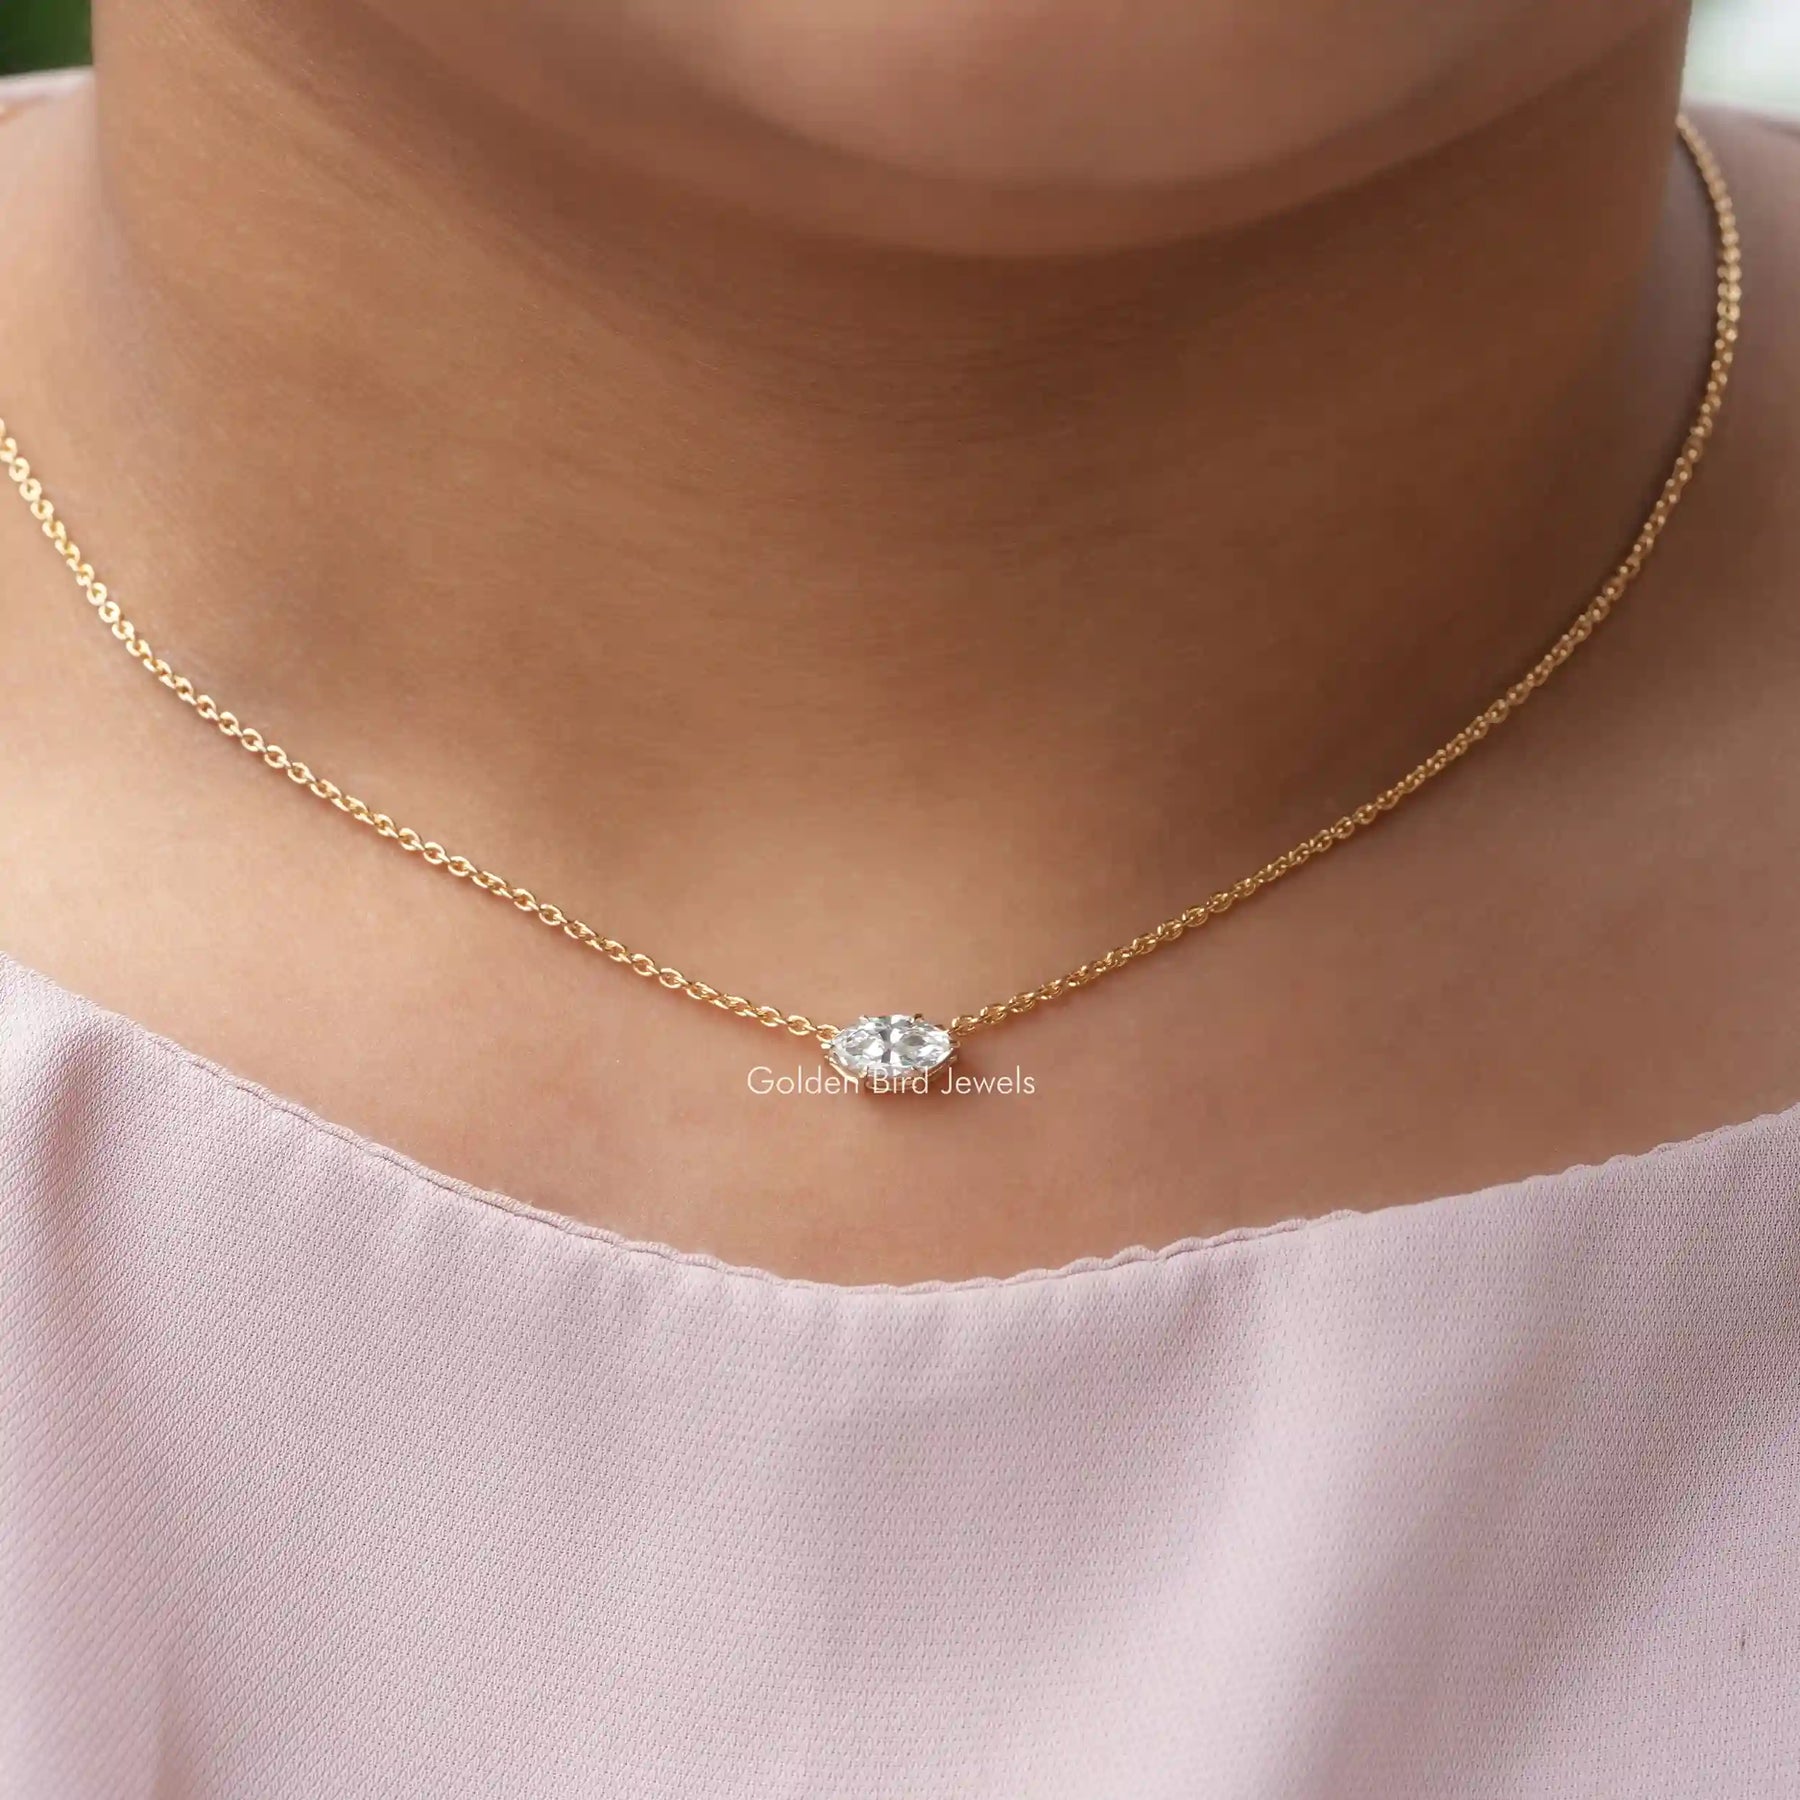 [In neck front view of lab-grown diamond marquise solitaire pendant]-[Golden Bird Jewels]